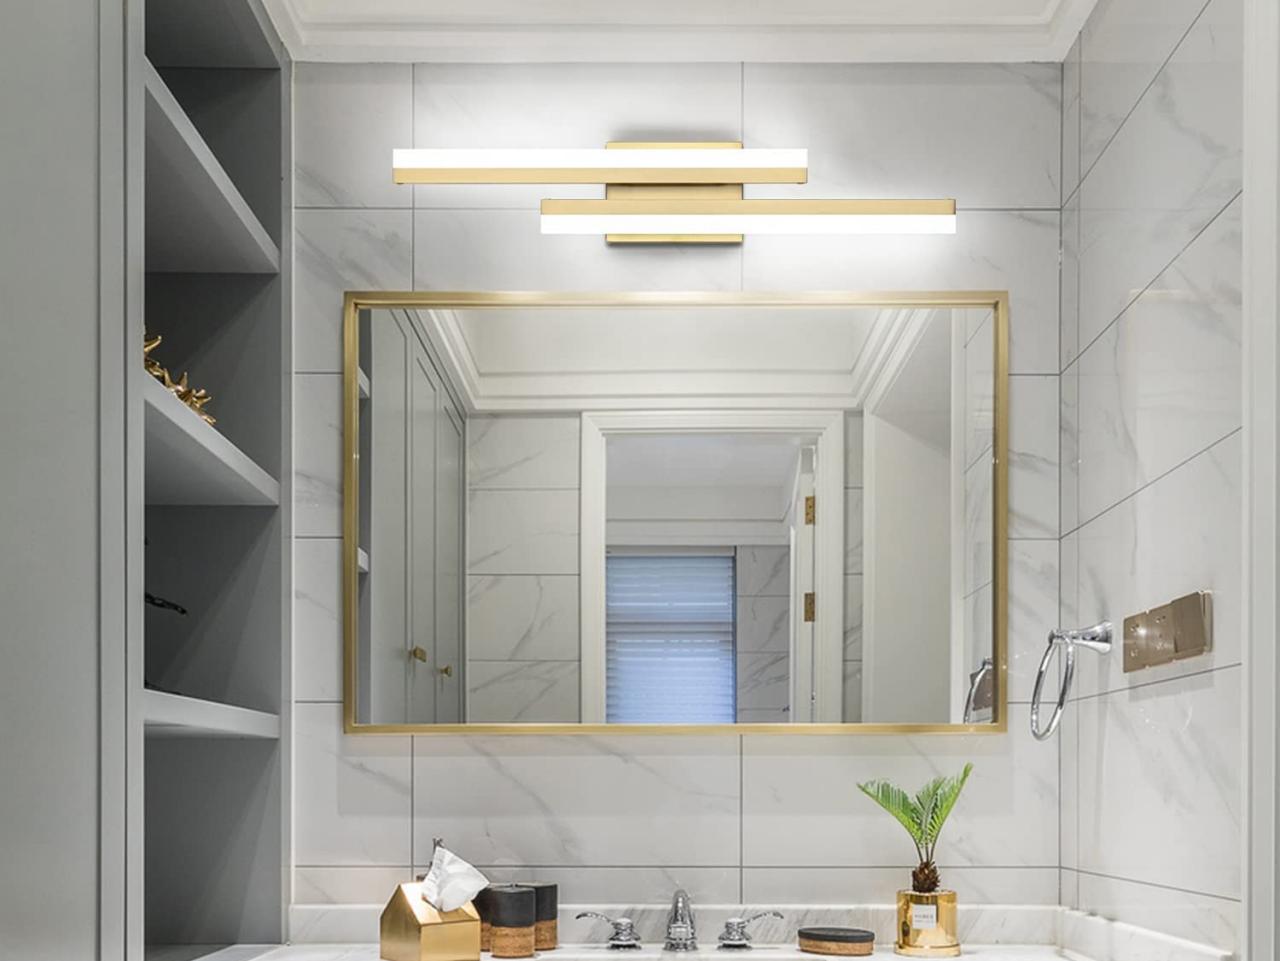 https://hgtvhome.sndimg.com/content/dam/images/hgtv/products/2023/4/19/rx_amazon_dimmable-led-vanity-light.jpeg.rend.hgtvcom.1280.960.suffix/1681933786238.jpeg